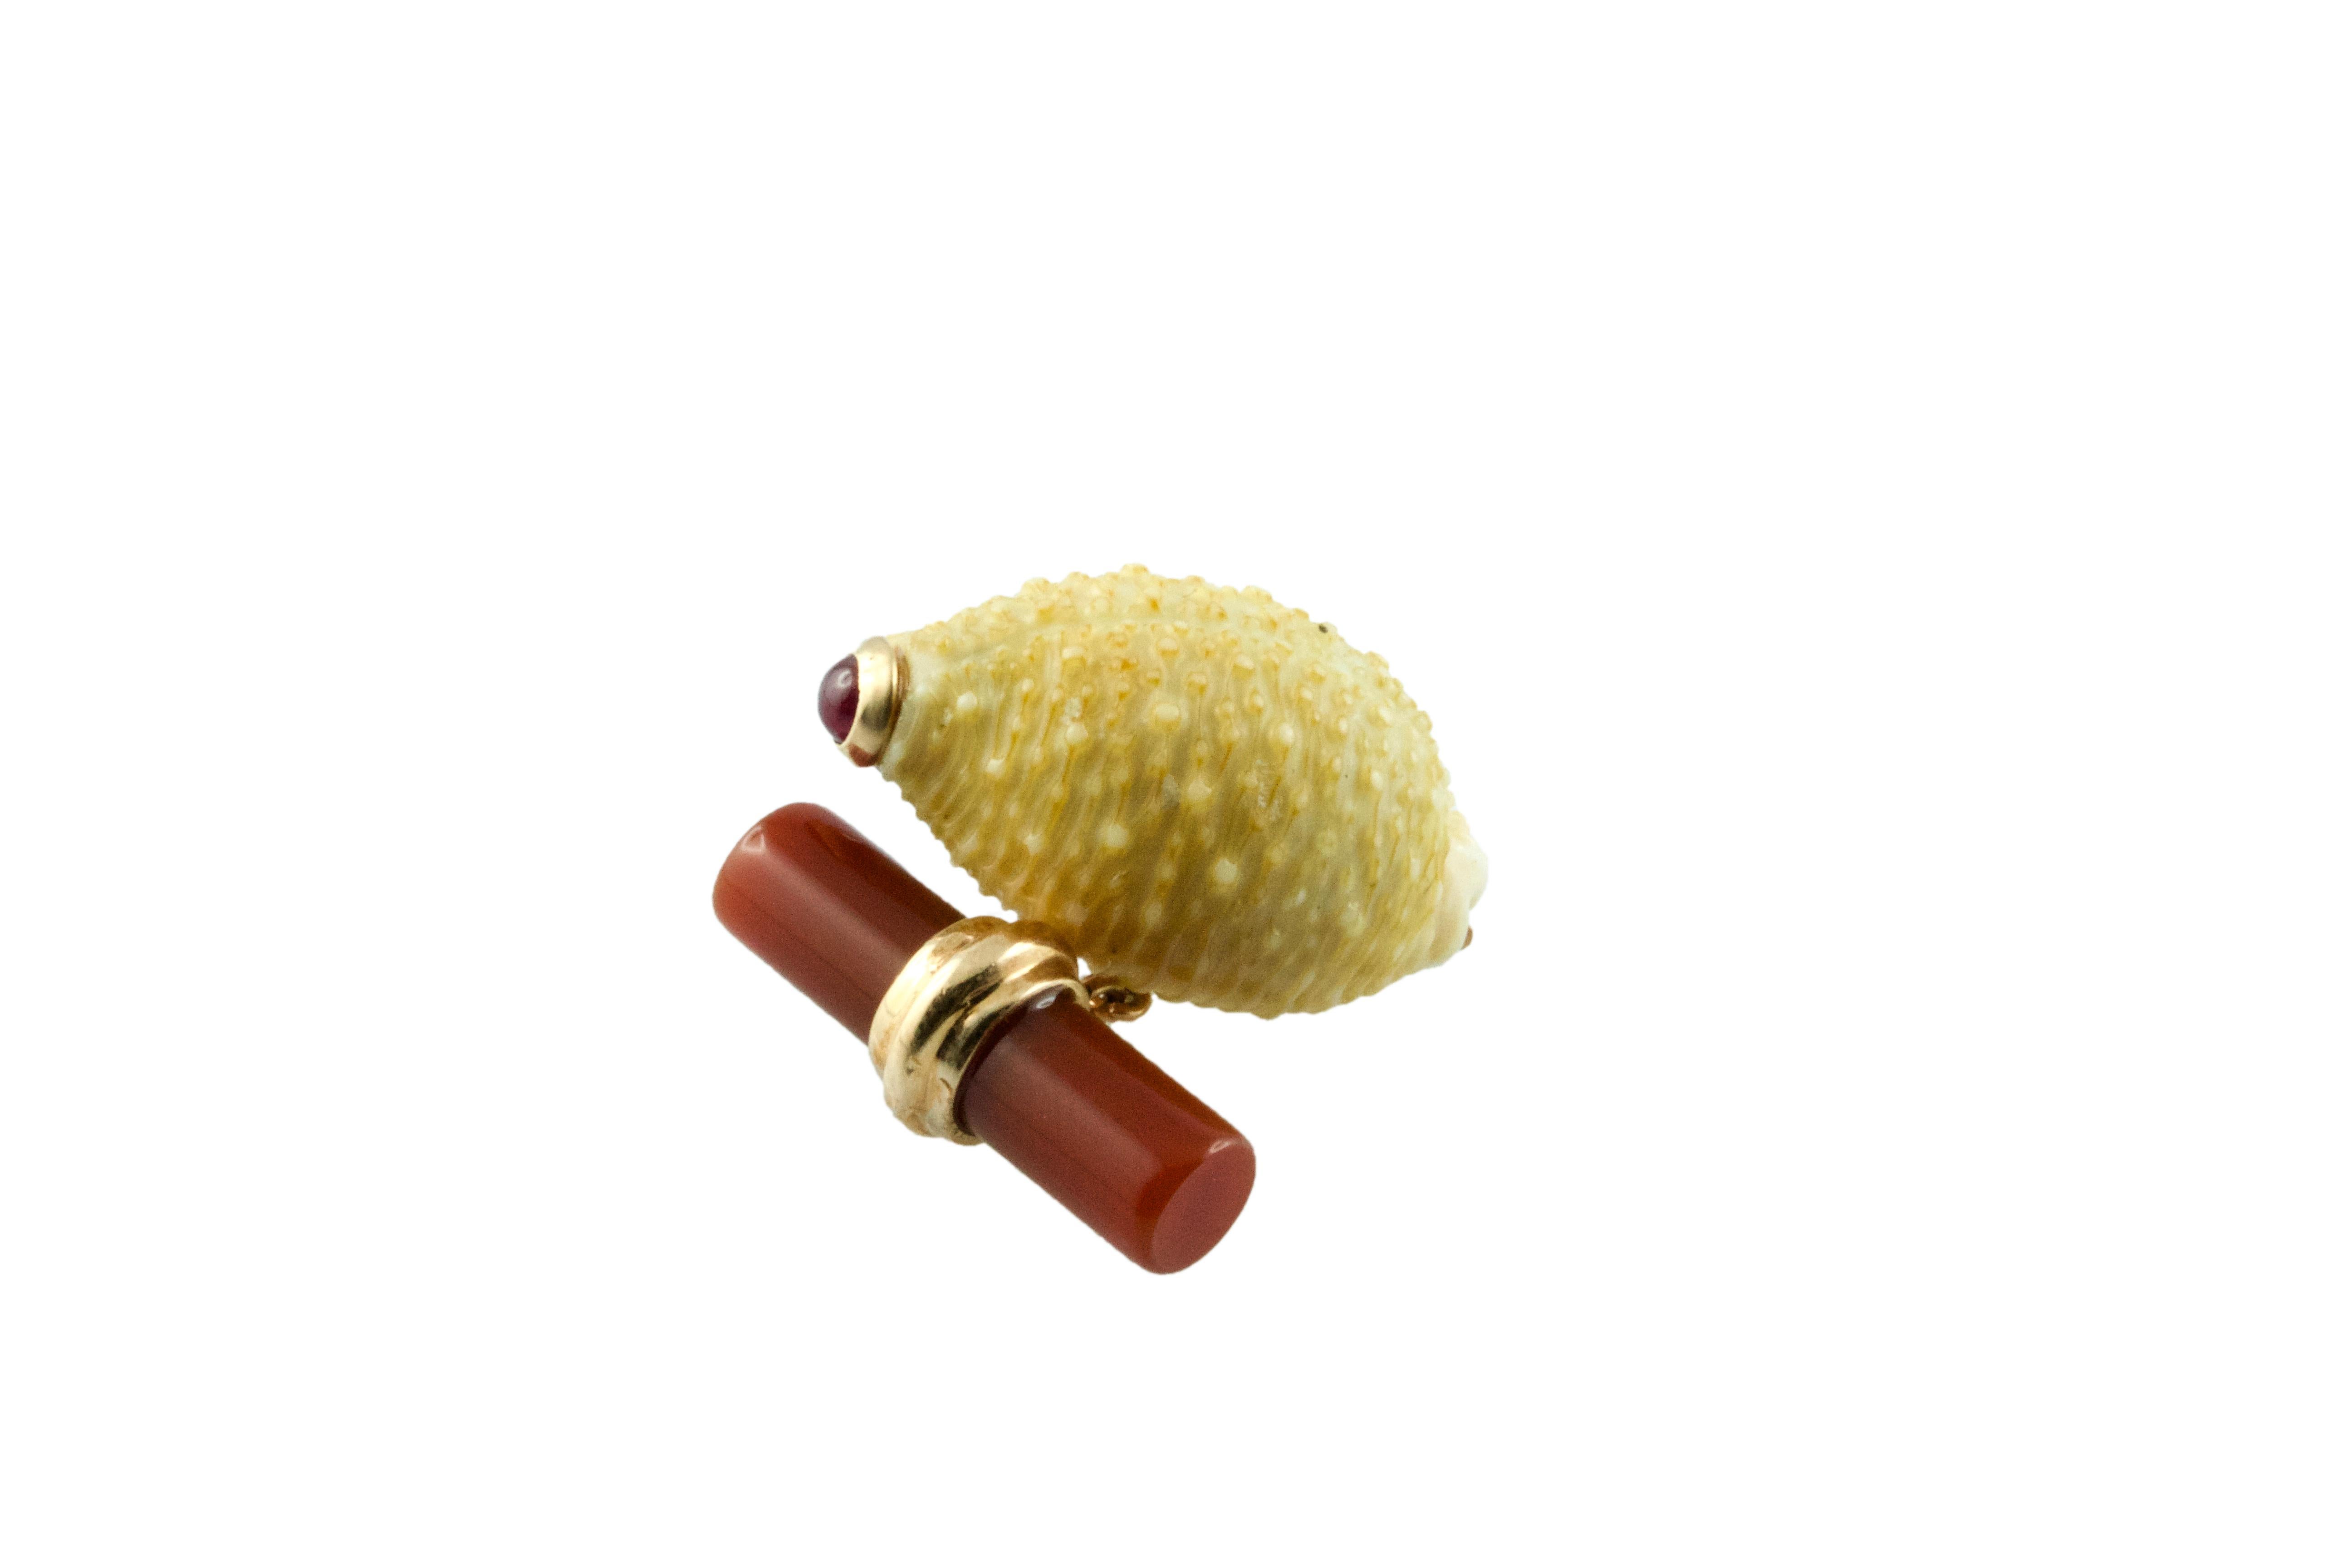 The striking natural patterns of the shell are the centerpiece of these cufflinks that are unique and elegant. Each shell is decorated with a cabochon ruby at the top, mounted in 14k rose gold, which also makes the post. The toggle is a cylinder